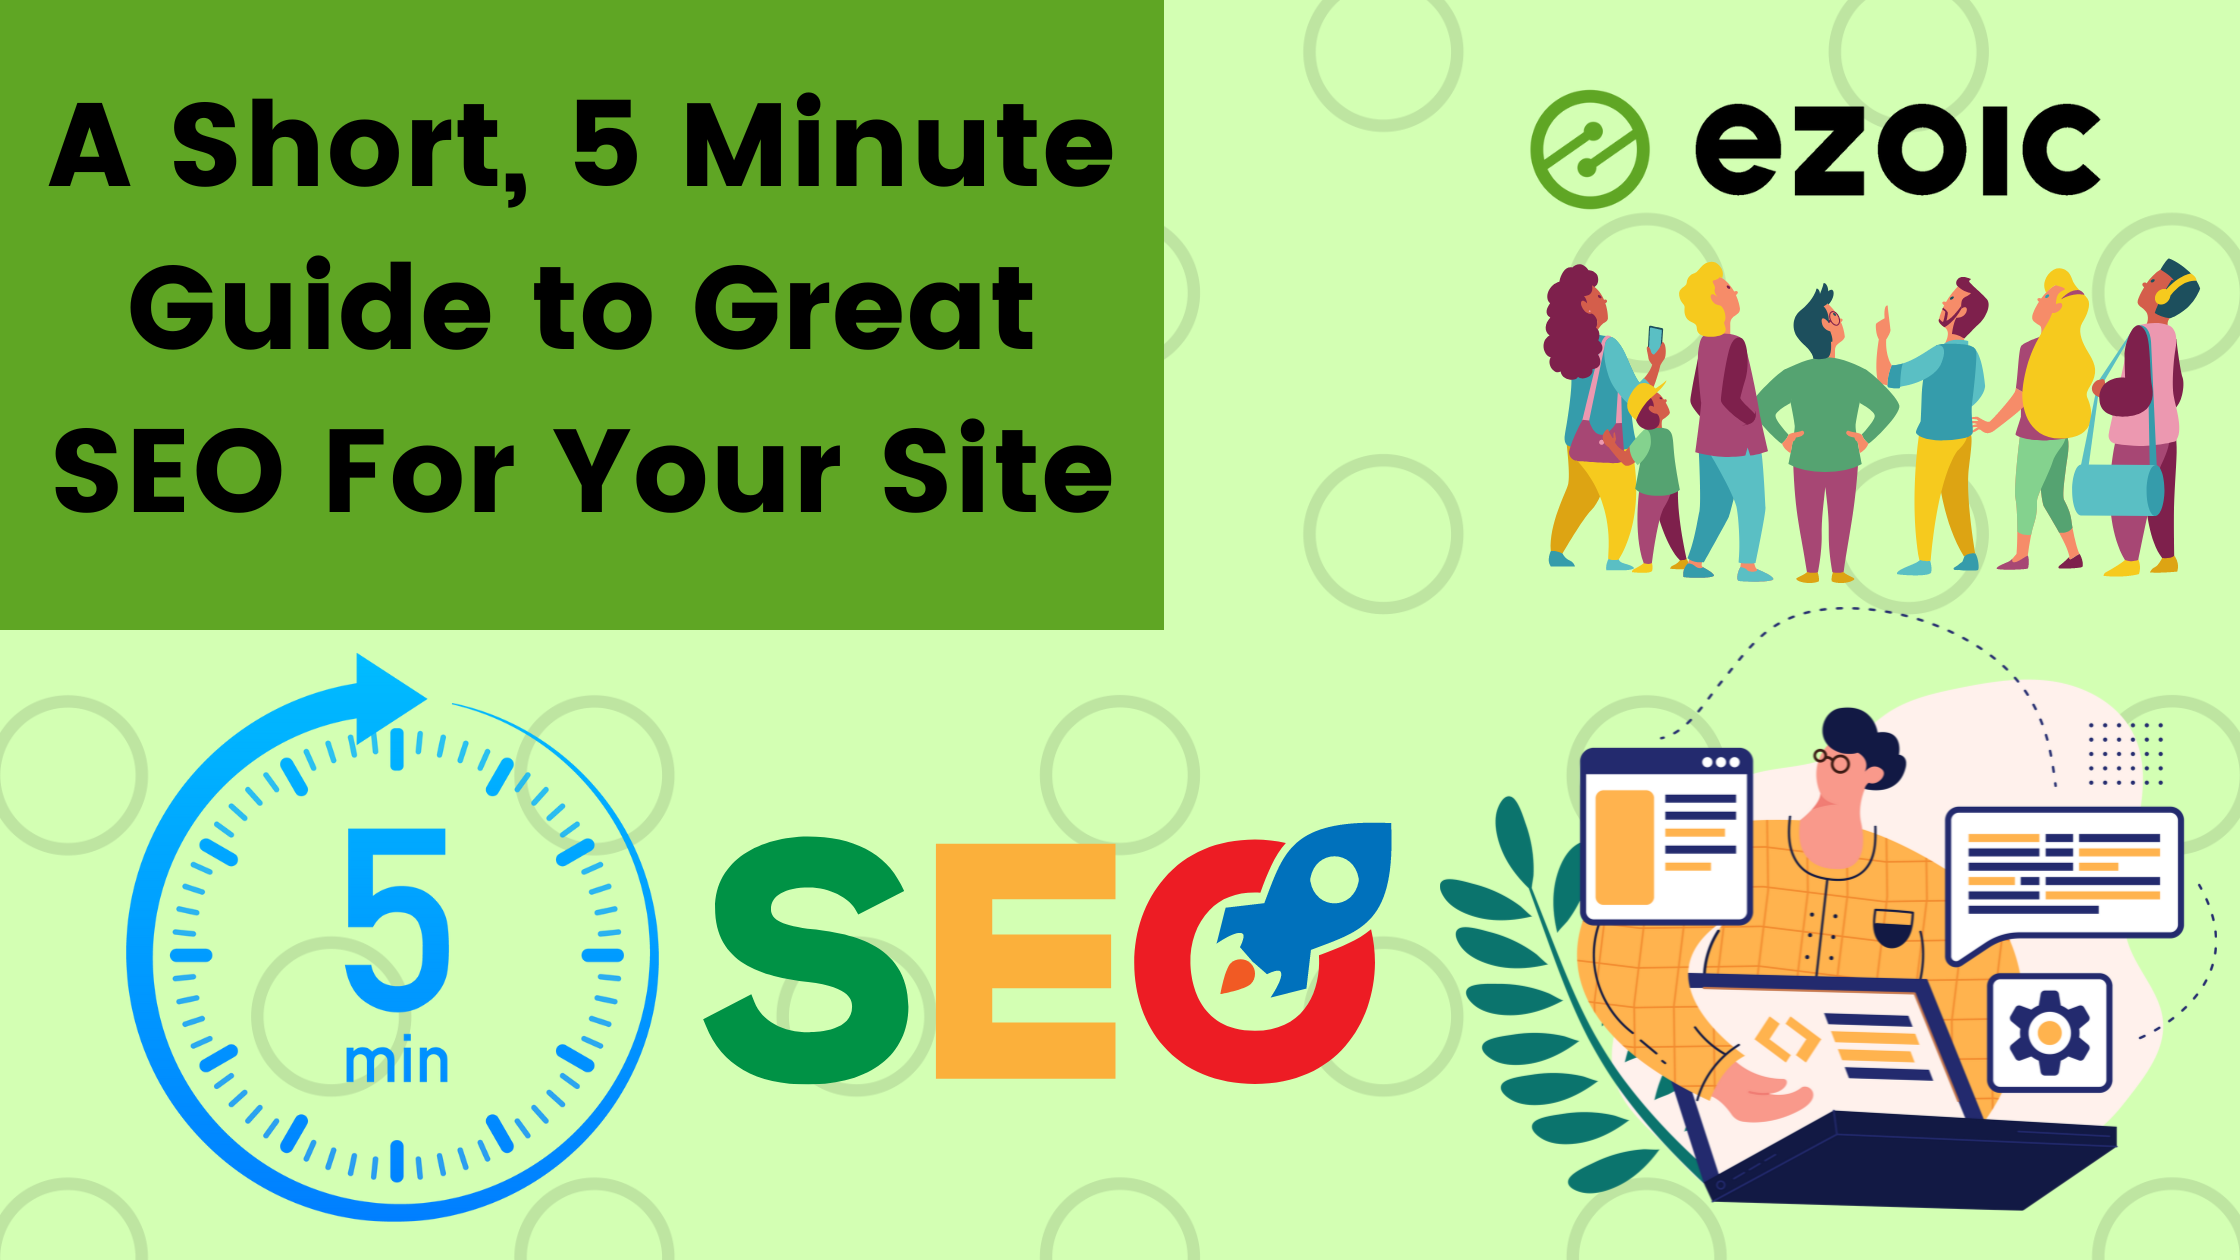 A Short, 5 Minute Guide to Great SEO For Your Site